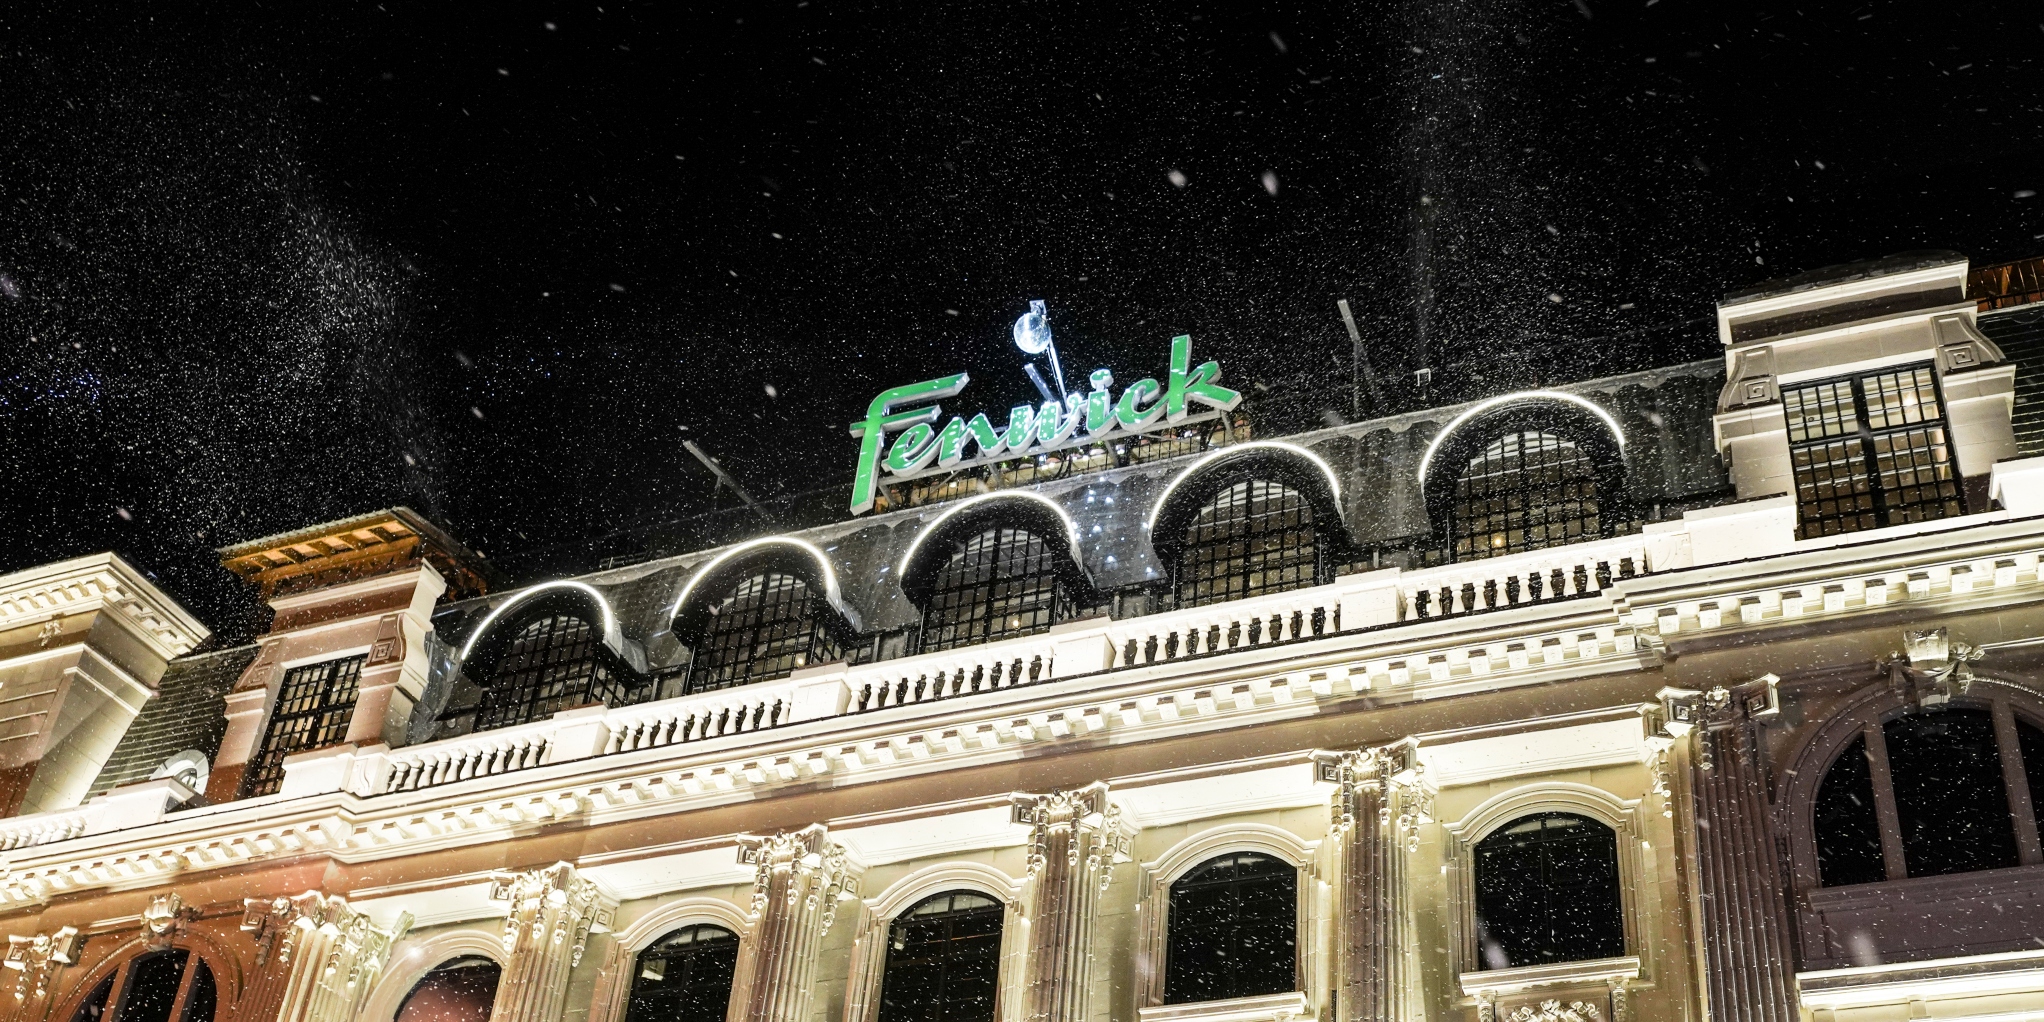 Image of Fenwick sign on their rooftop at night.